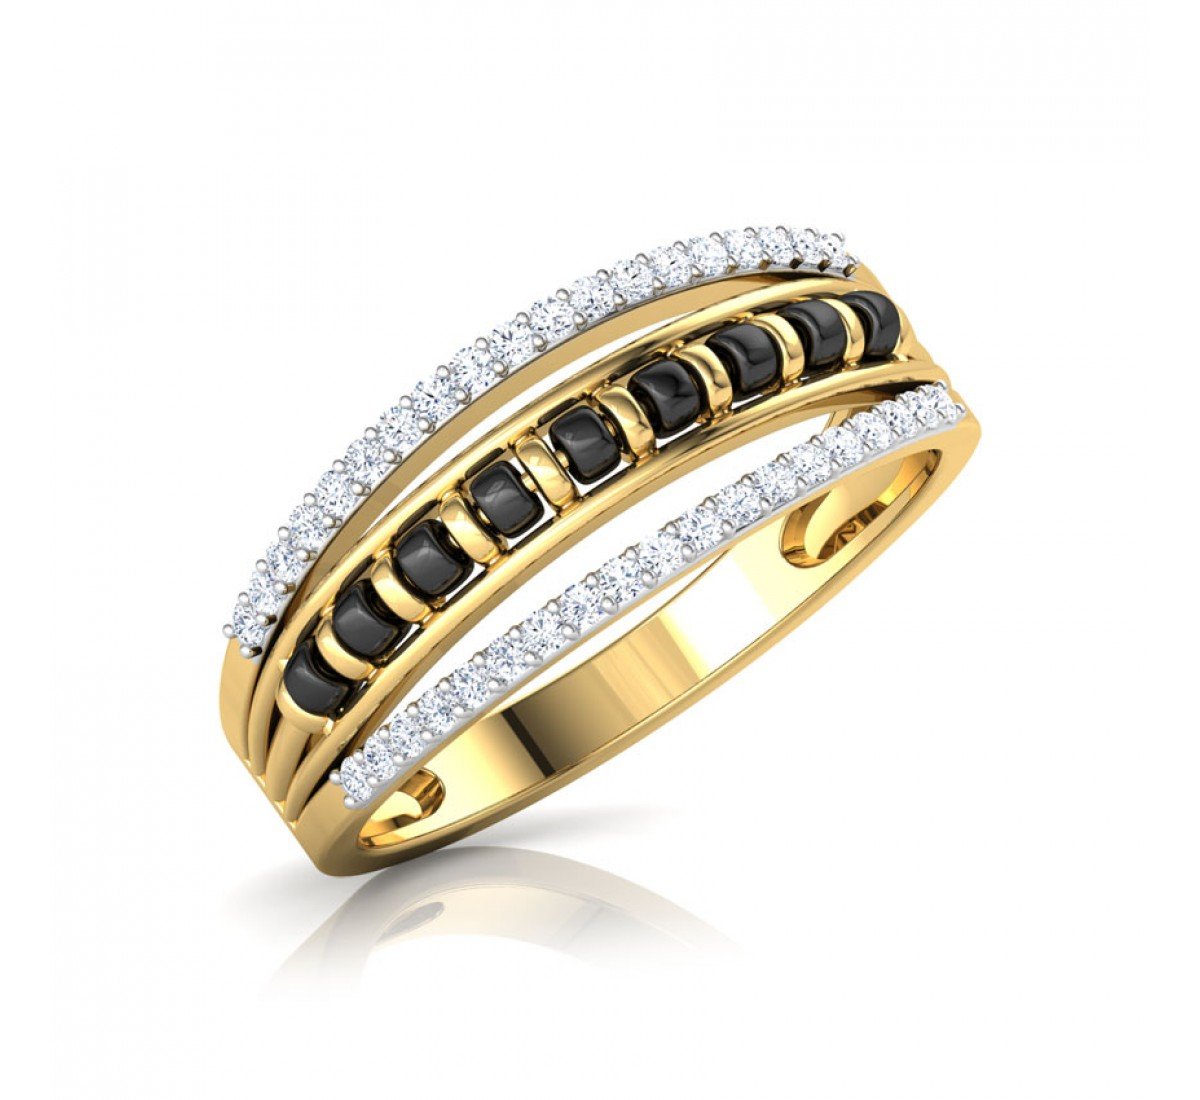 Mangalsutra Rings Jewellery - 8 Latest Mangalsutra Rings Jewellery Designs  @ Rs 3288